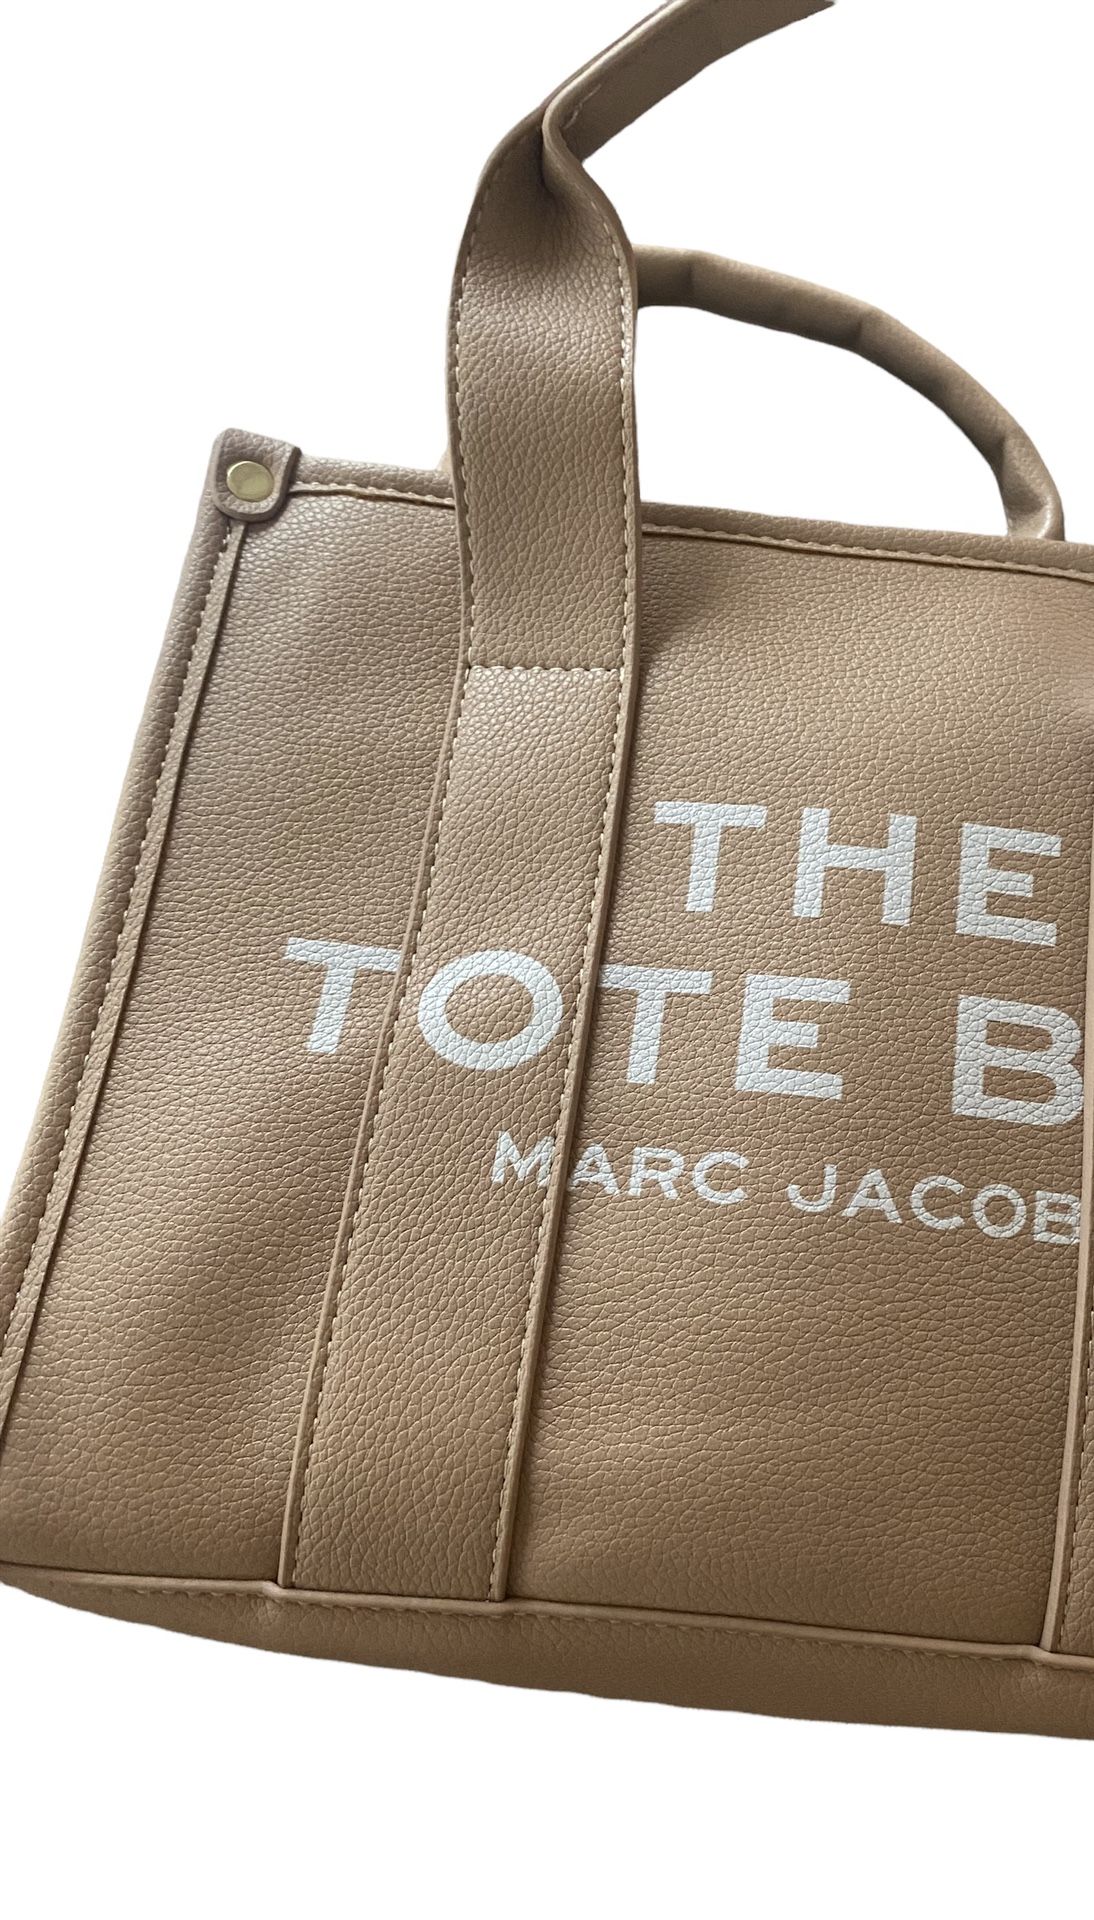 The Tote Bag By A Marc Jacob Mini